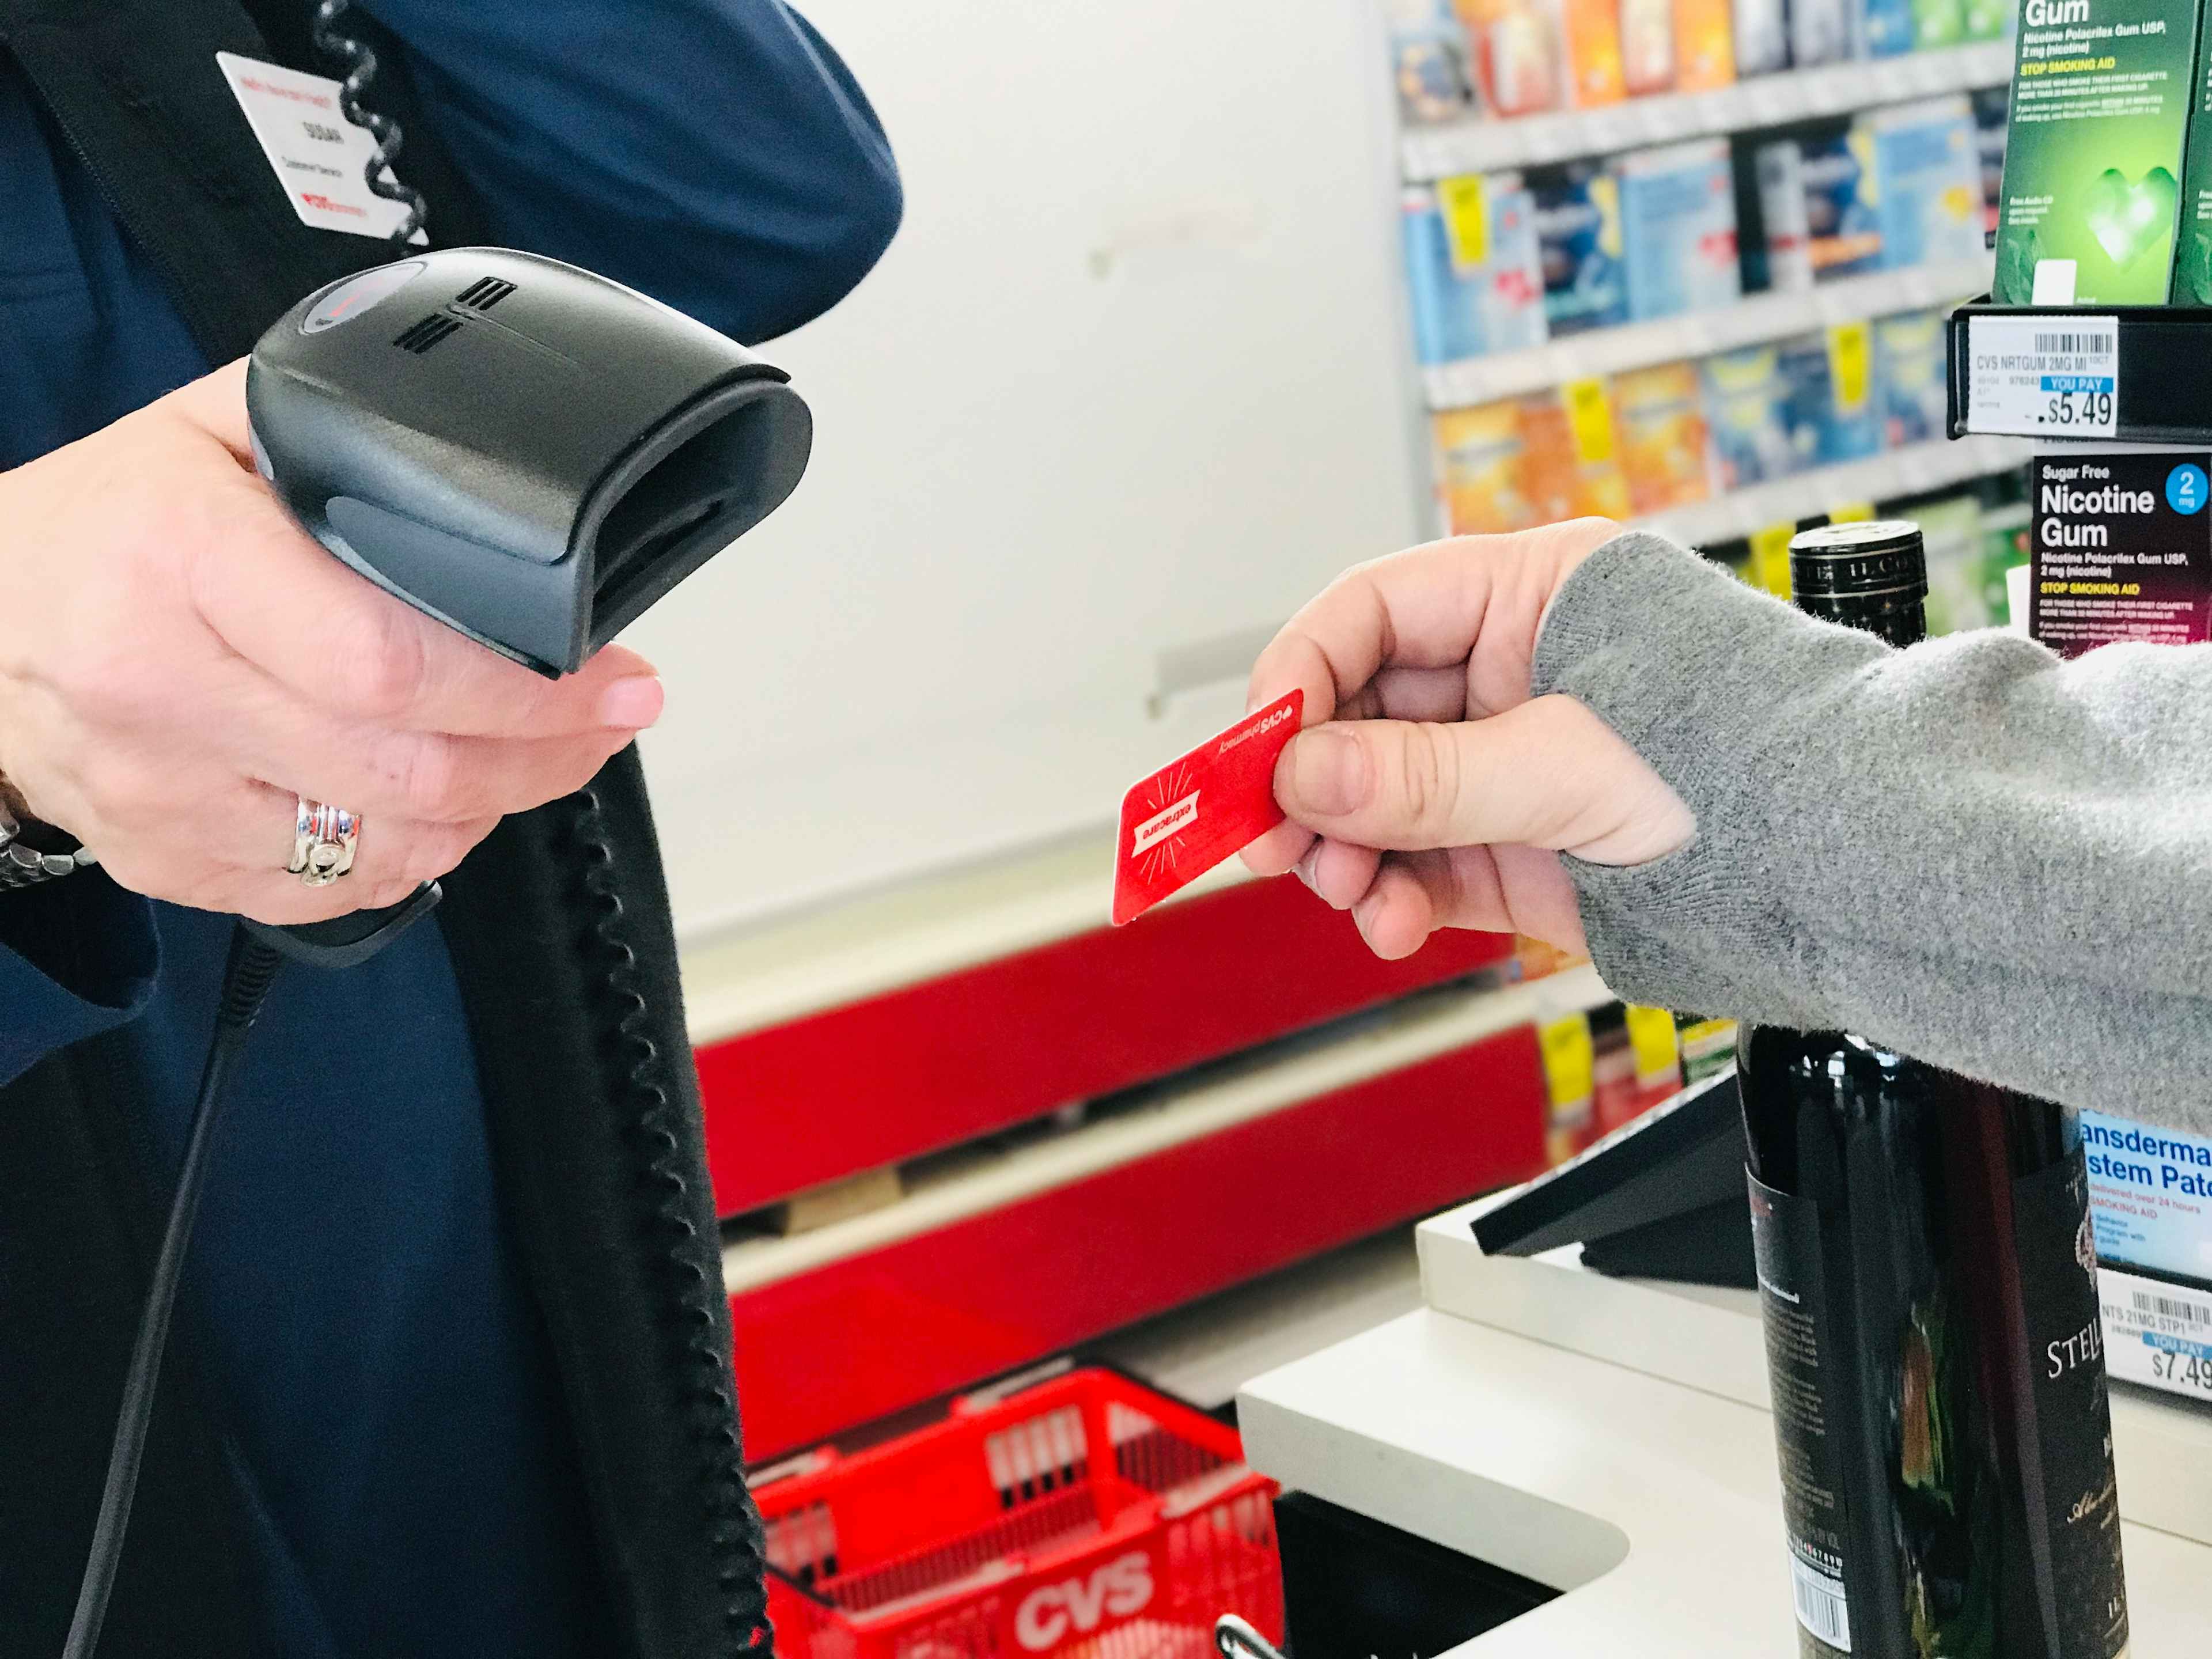 A CVS employee scanning a CVS ExtraCare card at checkout